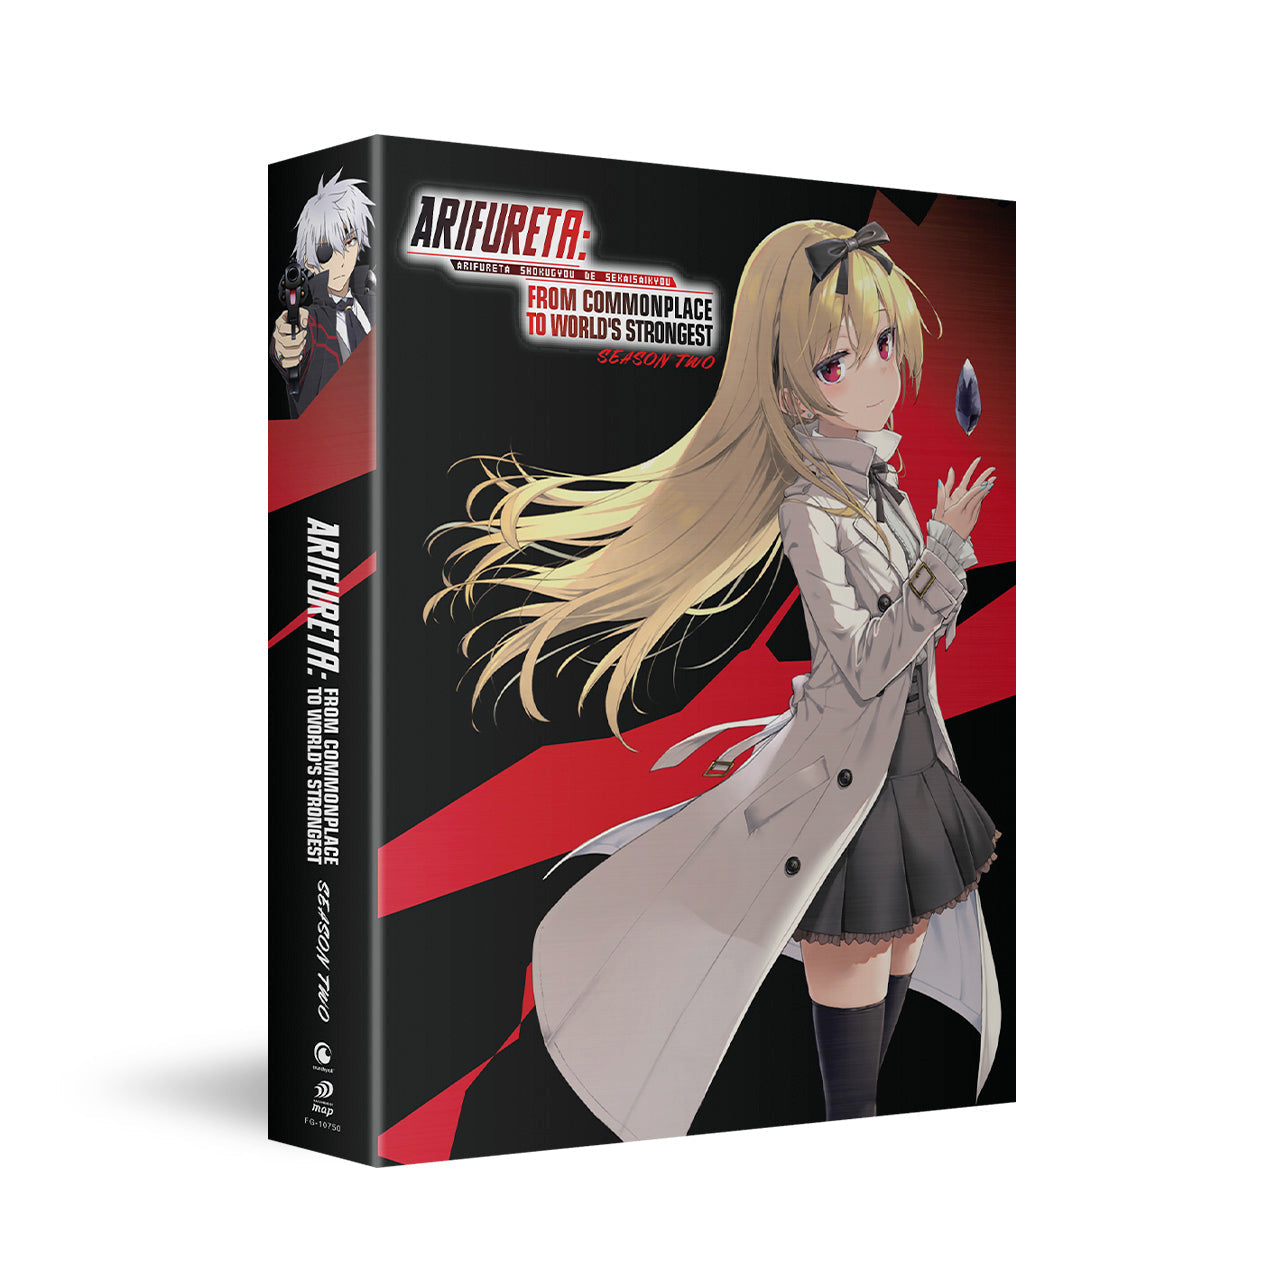 Arifureta: From Commonplace to World's Strongest - Season 2 - BD/DVD - LE image count 3